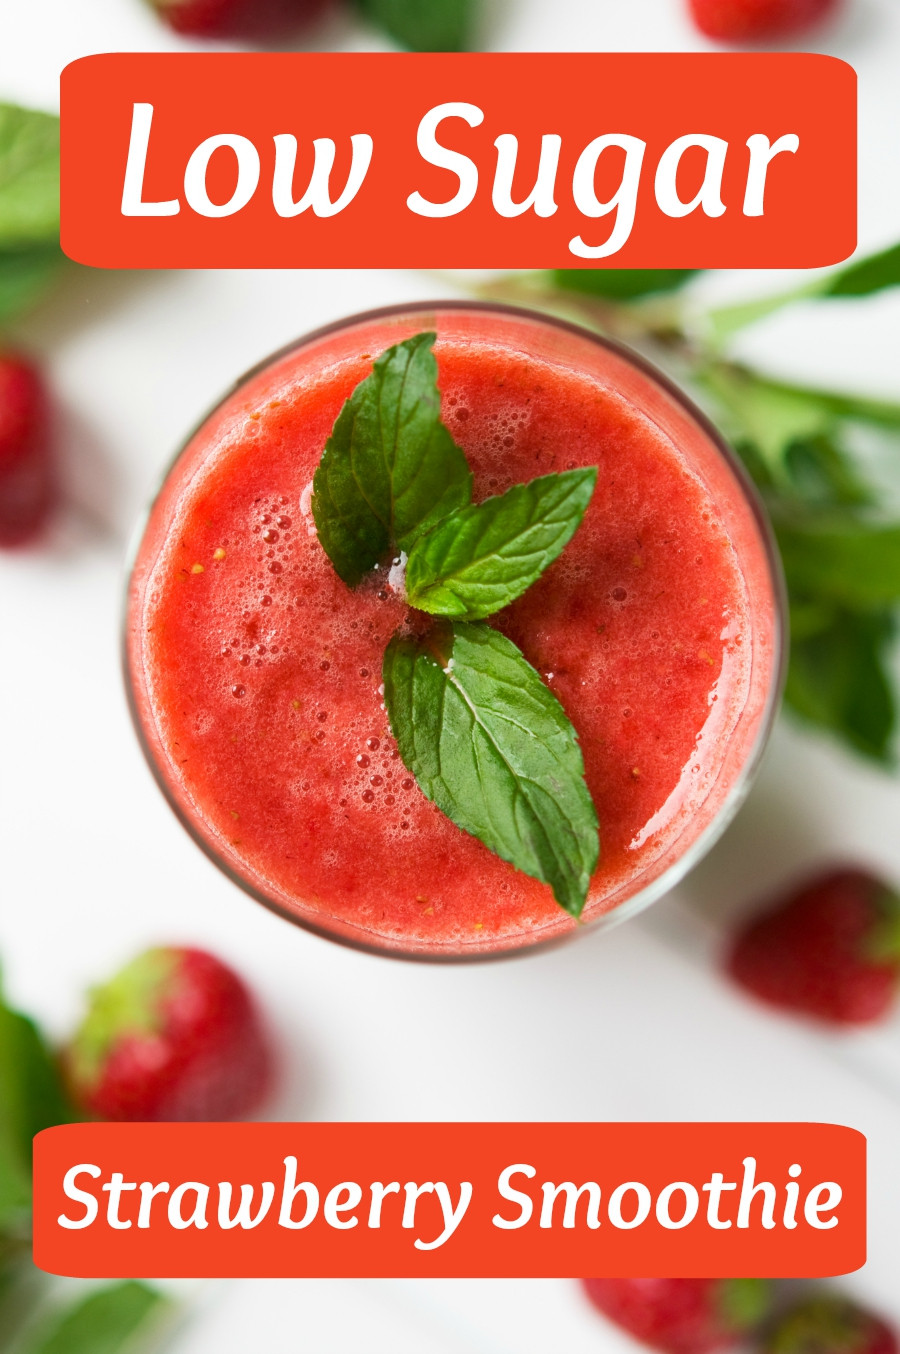 Diabetic Strawberry Smoothies
 Low Sugar Strawberry Smoothie All Nutribullet Recipes